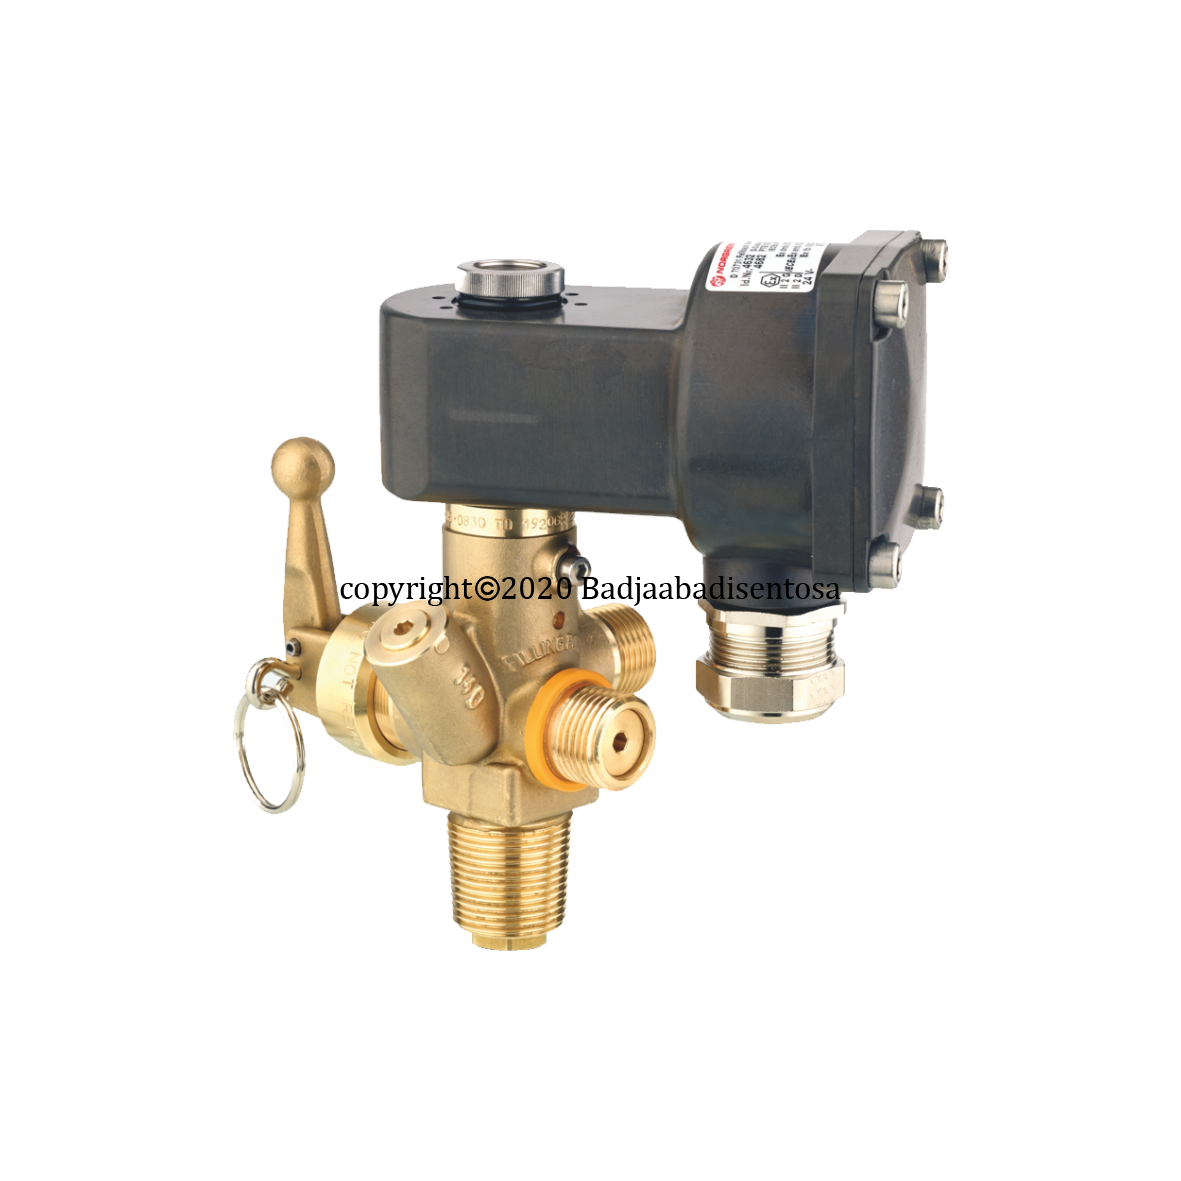 Rotarex - Firetec Complete Systems - Solenoid Fire Cylinder Valve with Atex Coil